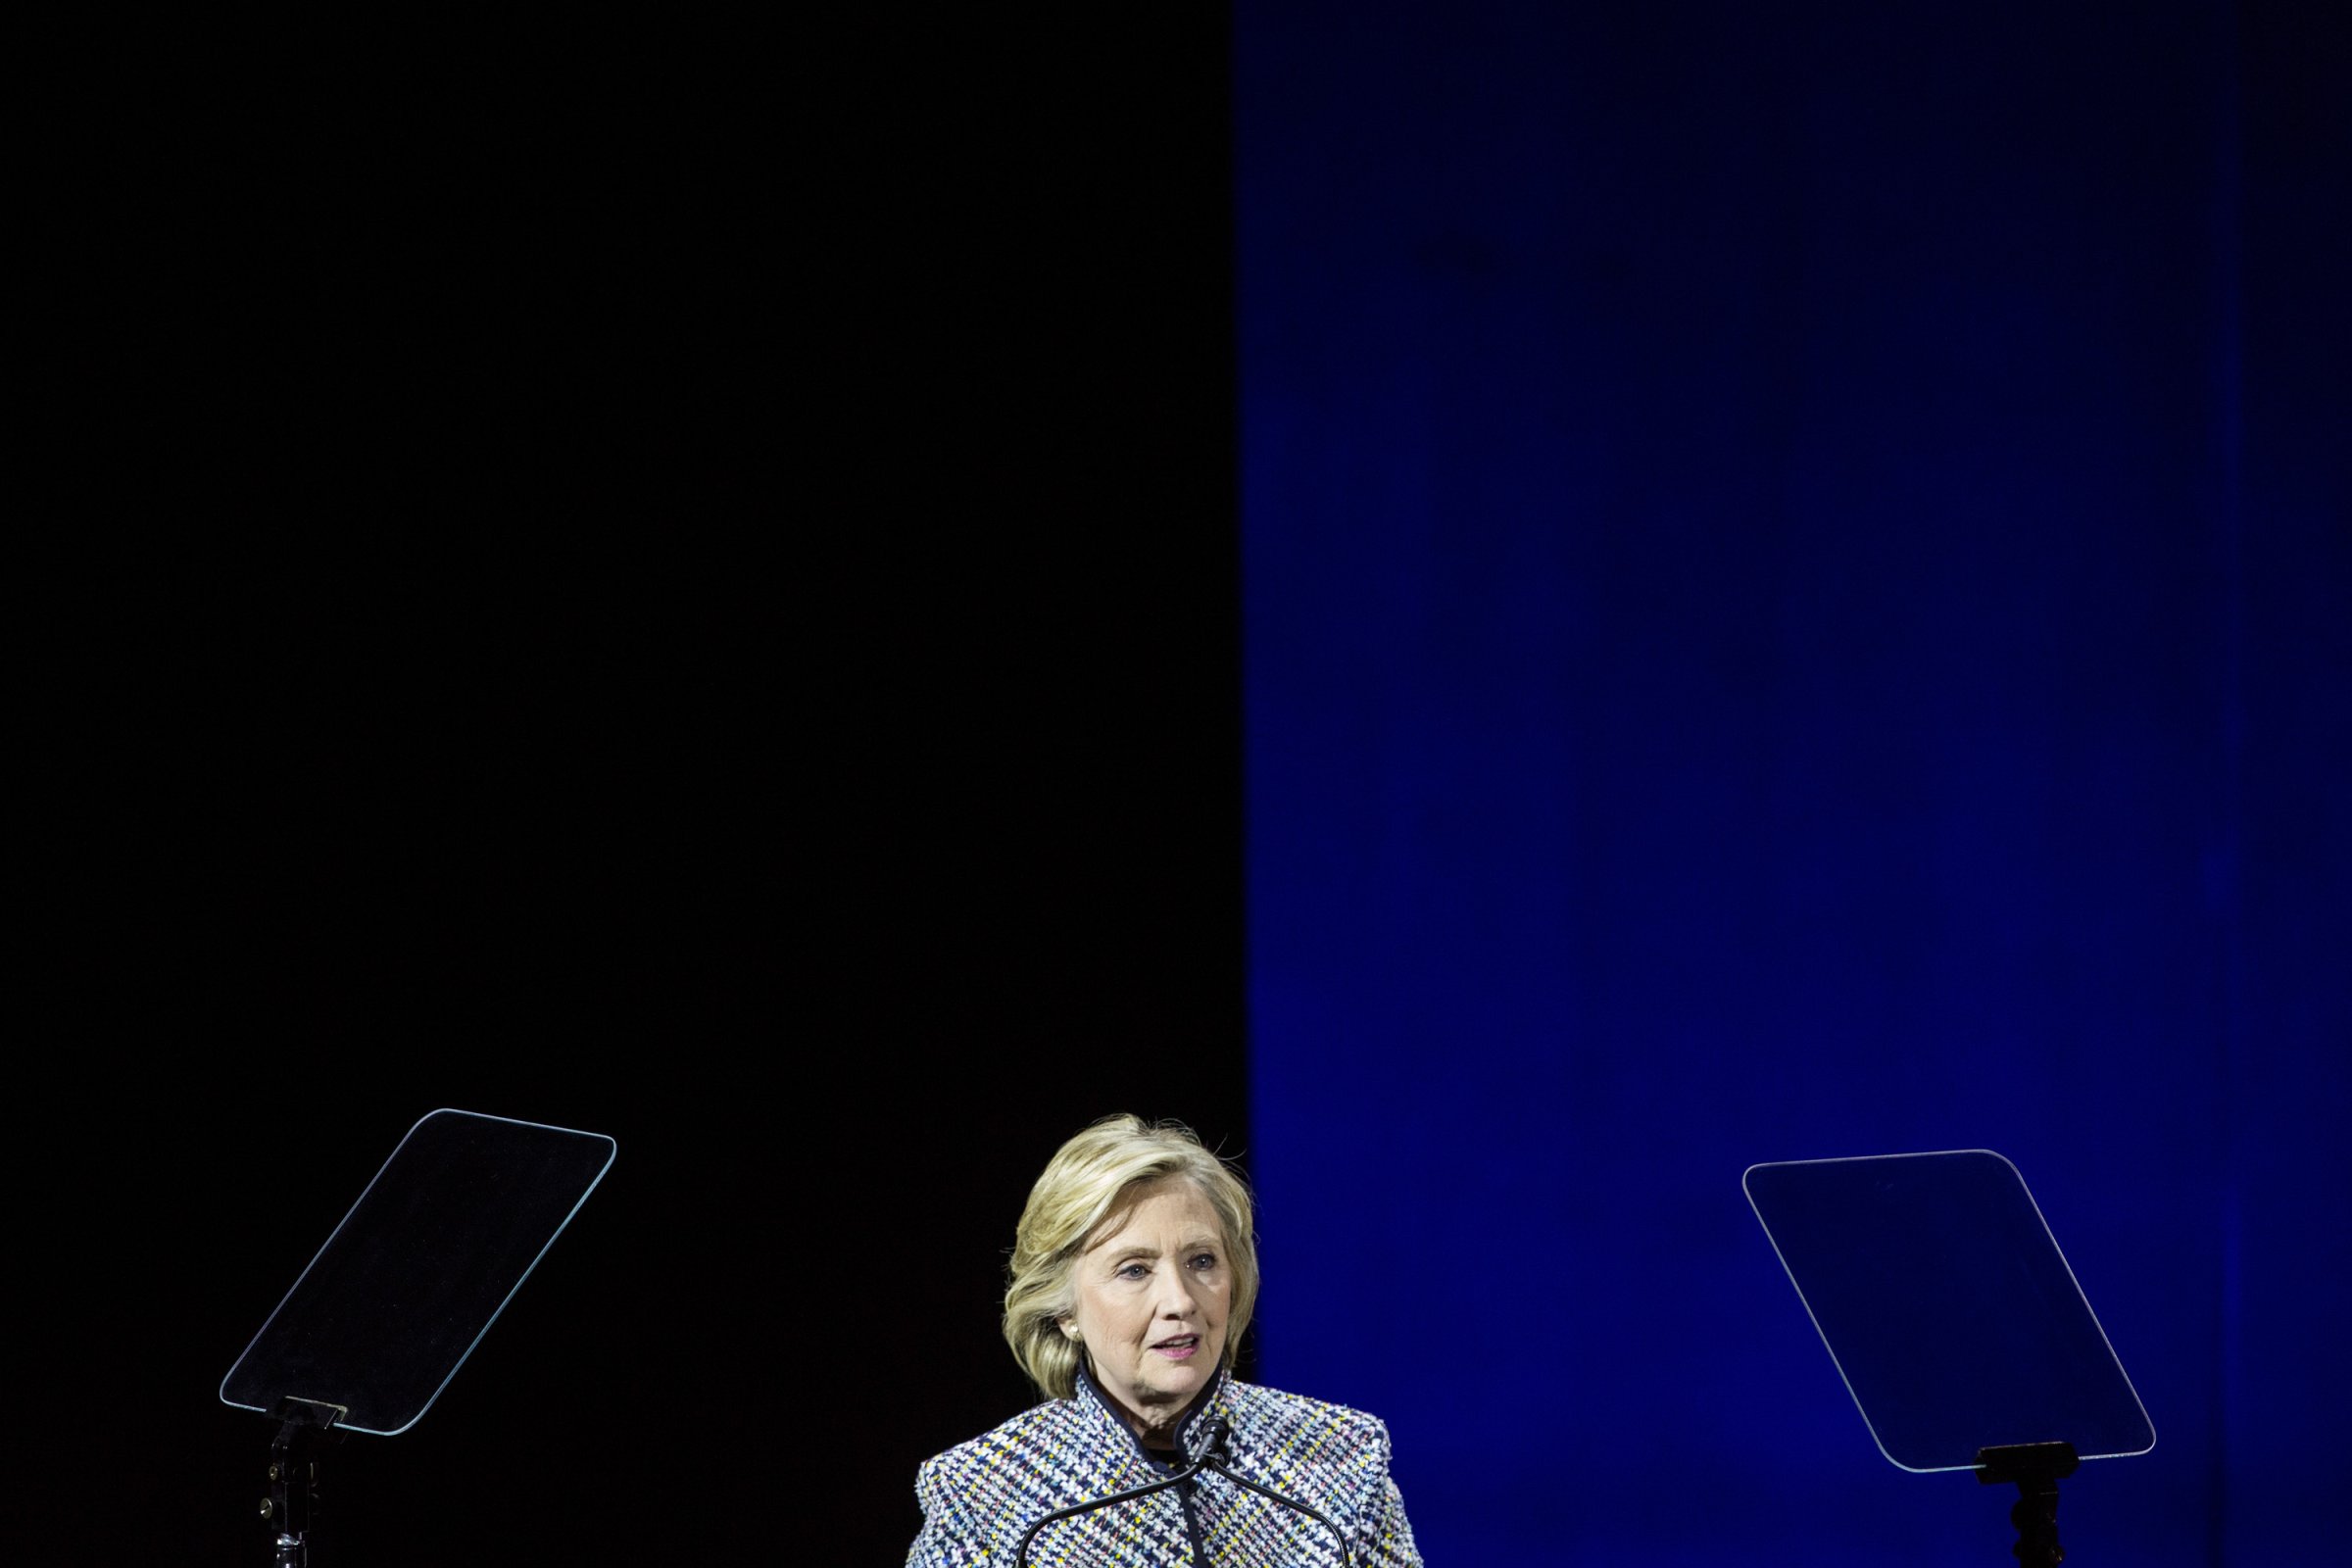 Democratic presidential hopeful and former Secretary of State Hillary Clinton addresses the Women in the World Conference on April 23, 2015 in New York City.